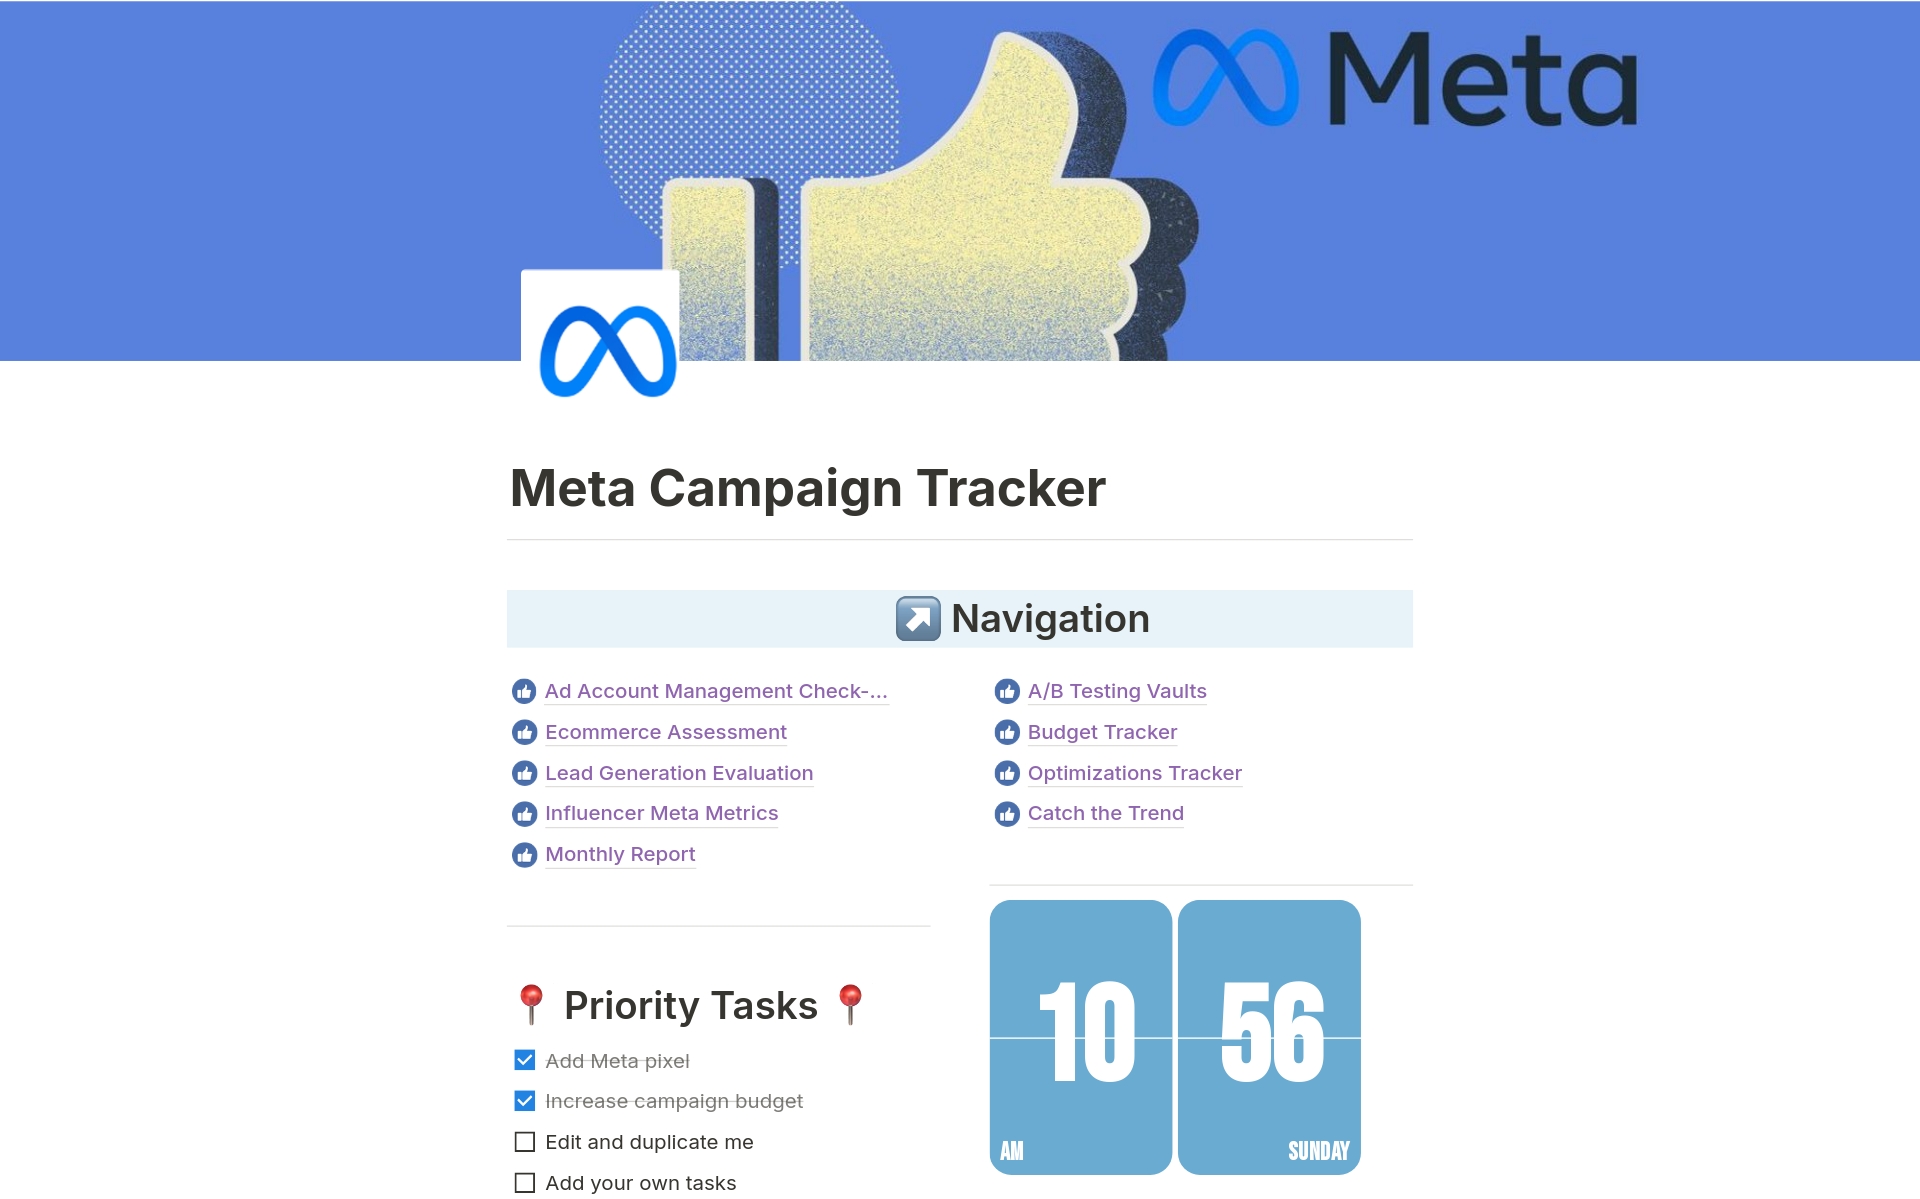 Unlock the potential of your ads with the Meta Campaign Tracker. Crafted for the Meta (Facebook) marketer, exclusively designed to elevate your marketing ROI to deliver growth